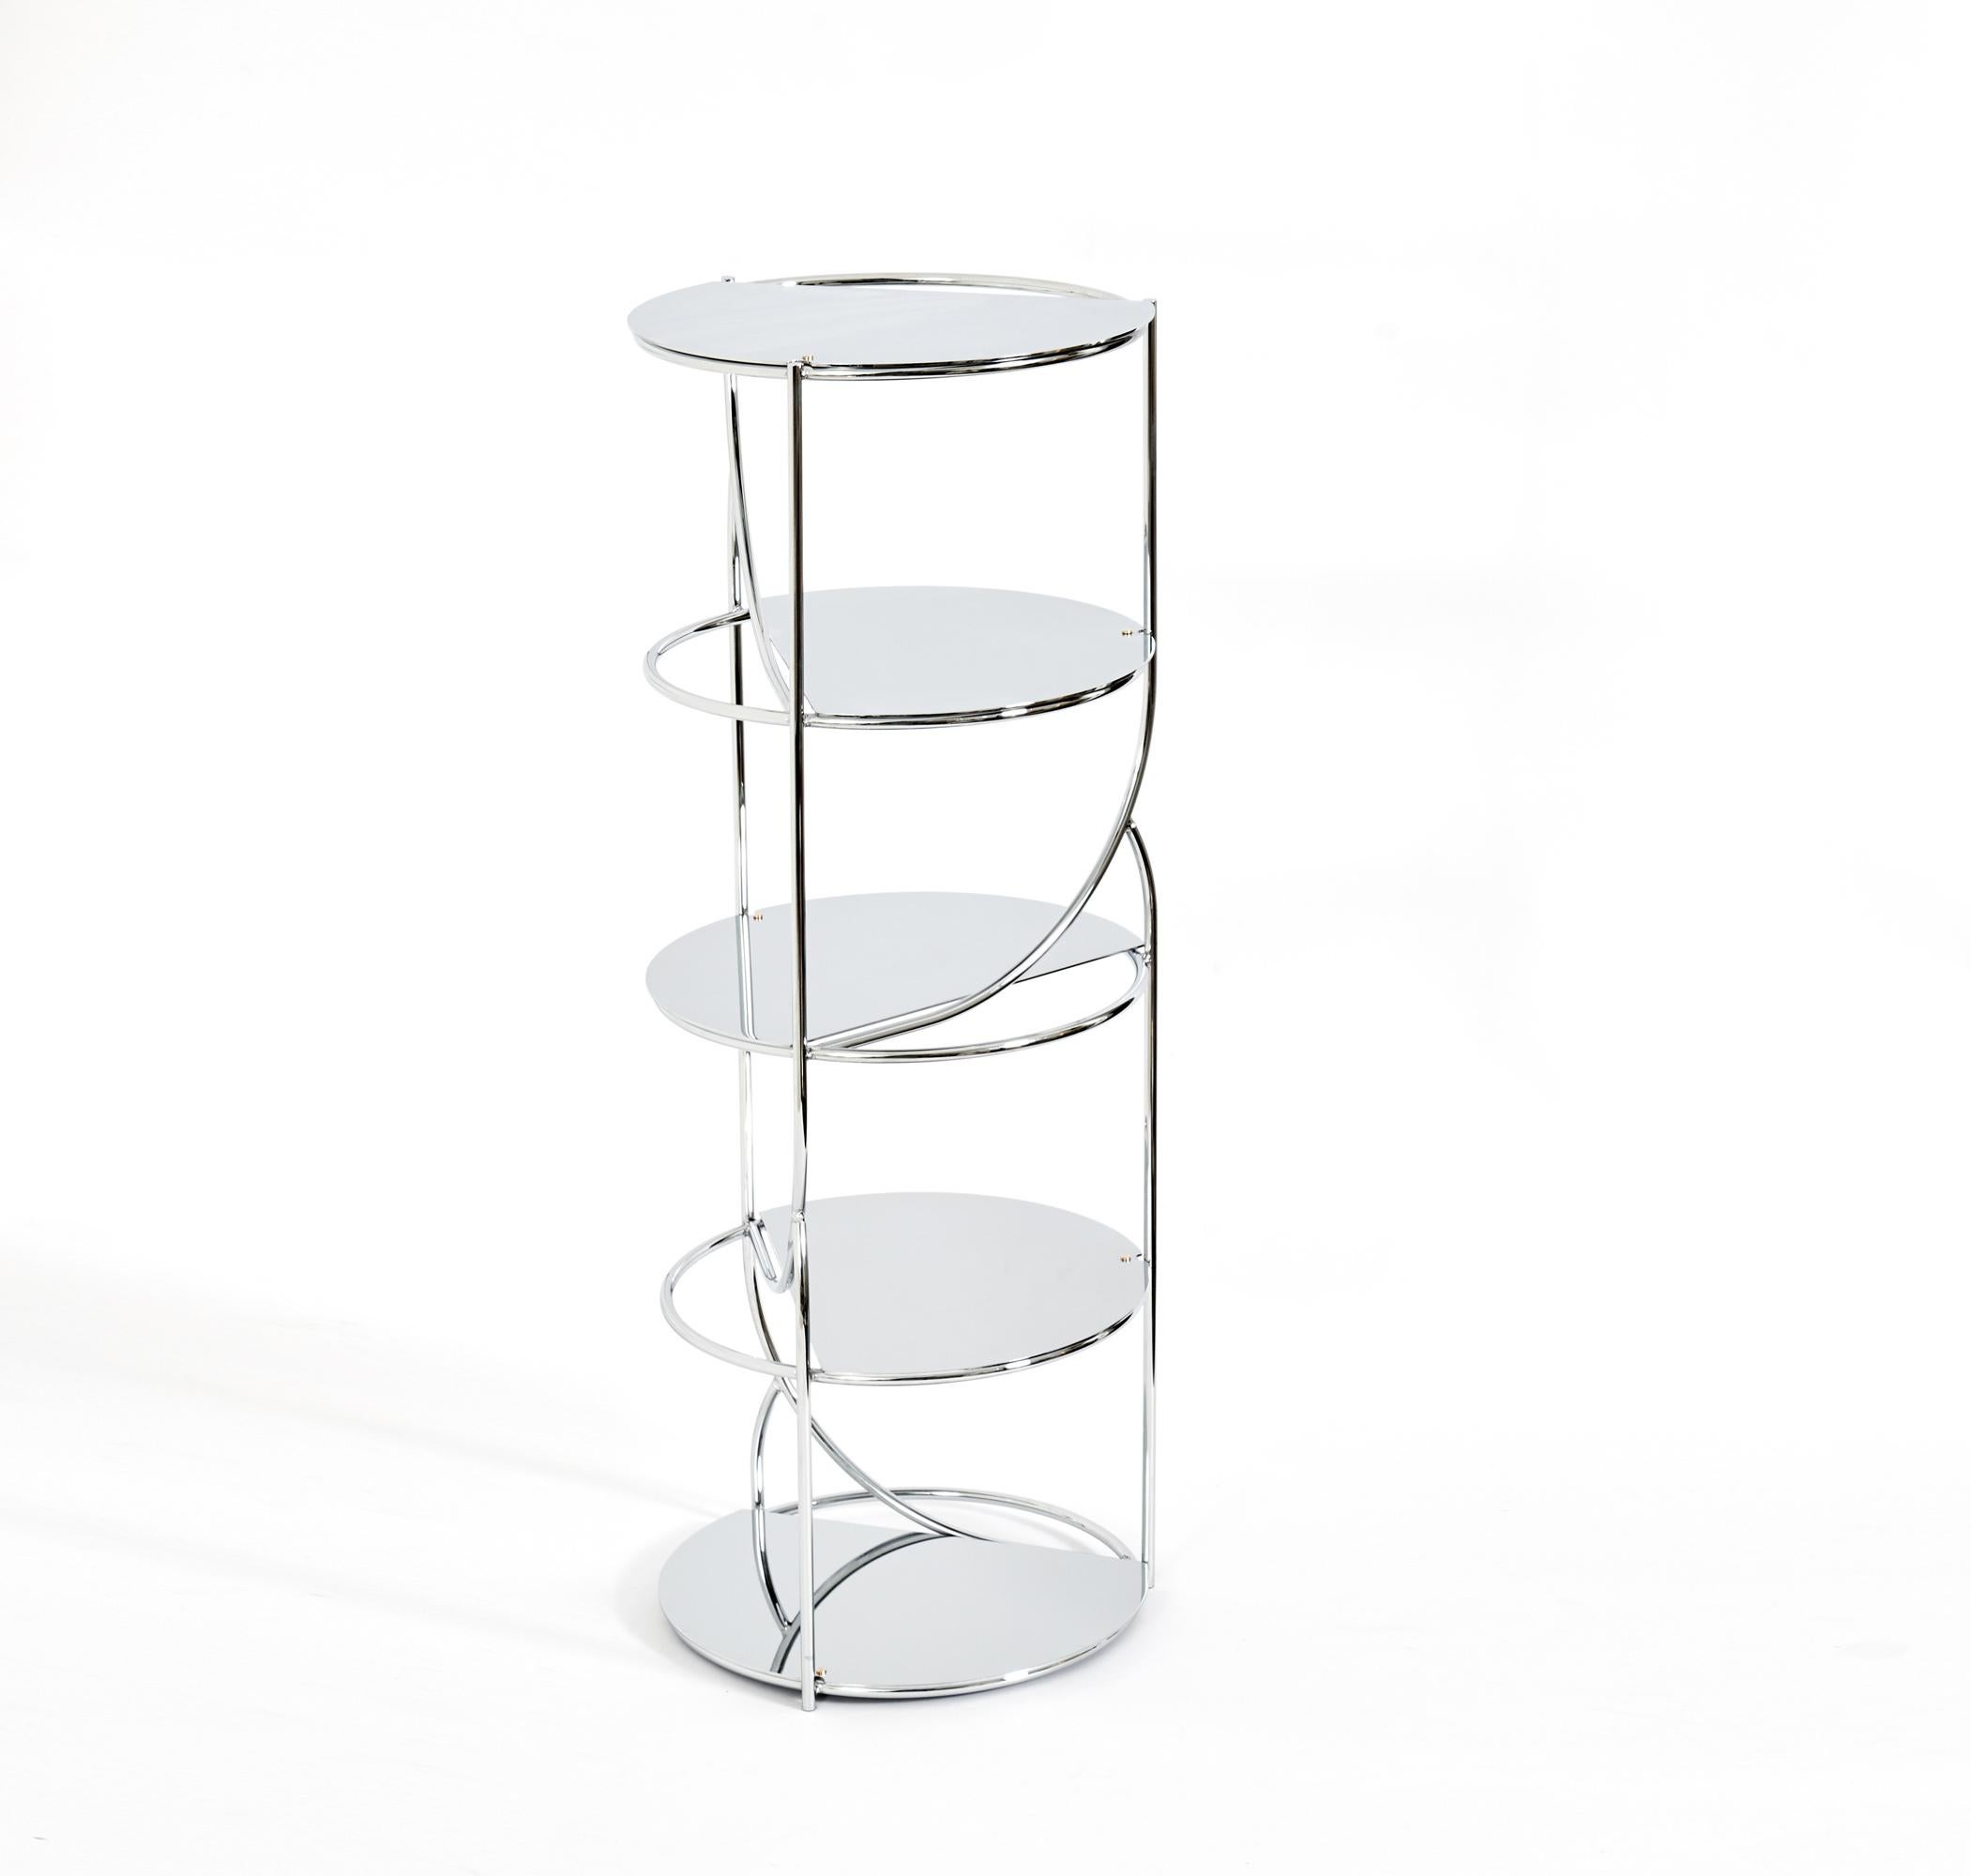 Italian Contemporary steel shelf tower, repositionable mirrored shelves made in Italy